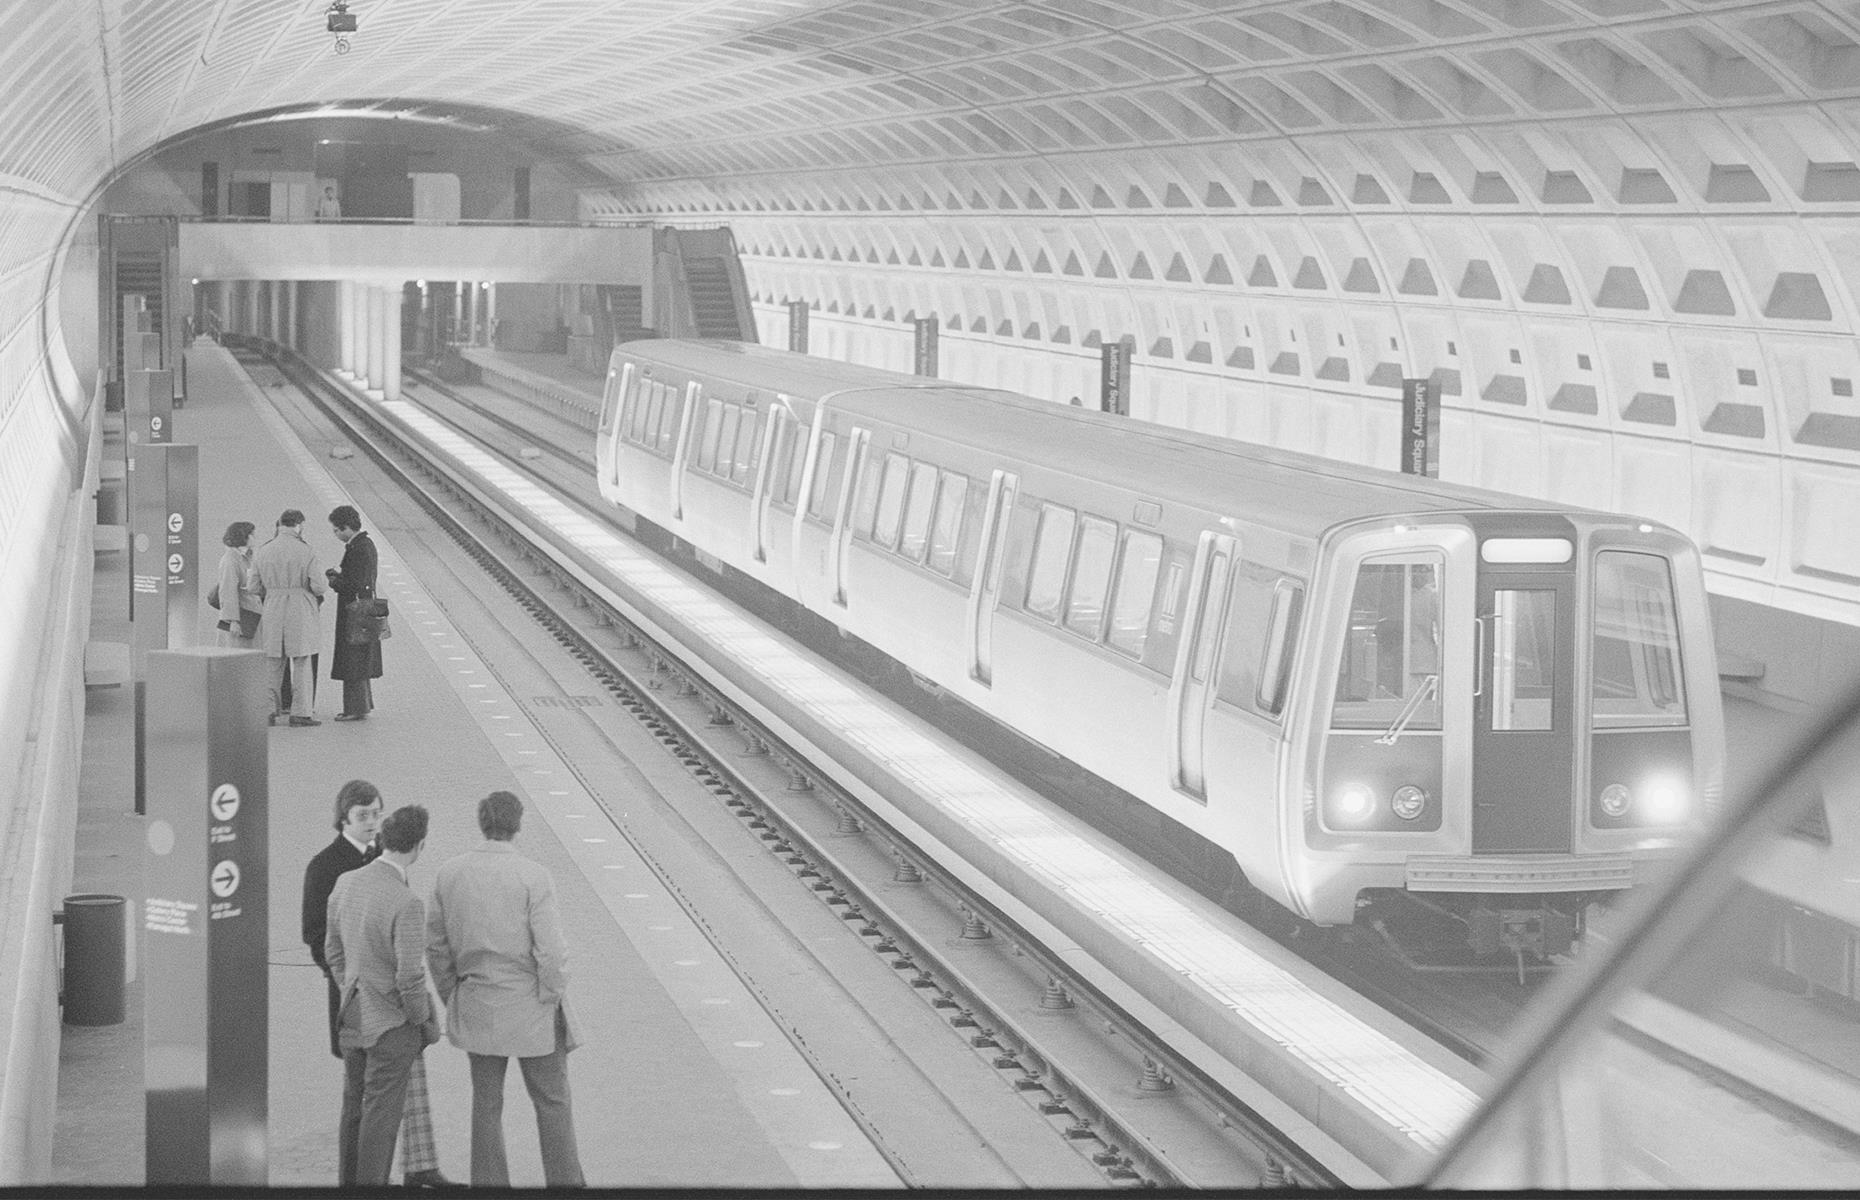 <p>The USA's capital was surprisingly late in establishing a subway system, when compared with other major cities like NYC and Chicago. Ground was broken for Washington DC's metro in 1969, with the first line opening in 1976 (the Red Line from Farragut North to Rhode Island Avenue). Early commuters wait on a metro platform in this photo from the same year.</p>  <p><strong><a href="https://www.loveexploring.com/galleries/72954/world-s-most-beautiful-subway-metro-stations">Now look at the world's most beautiful subway and metro stations</a></strong></p>